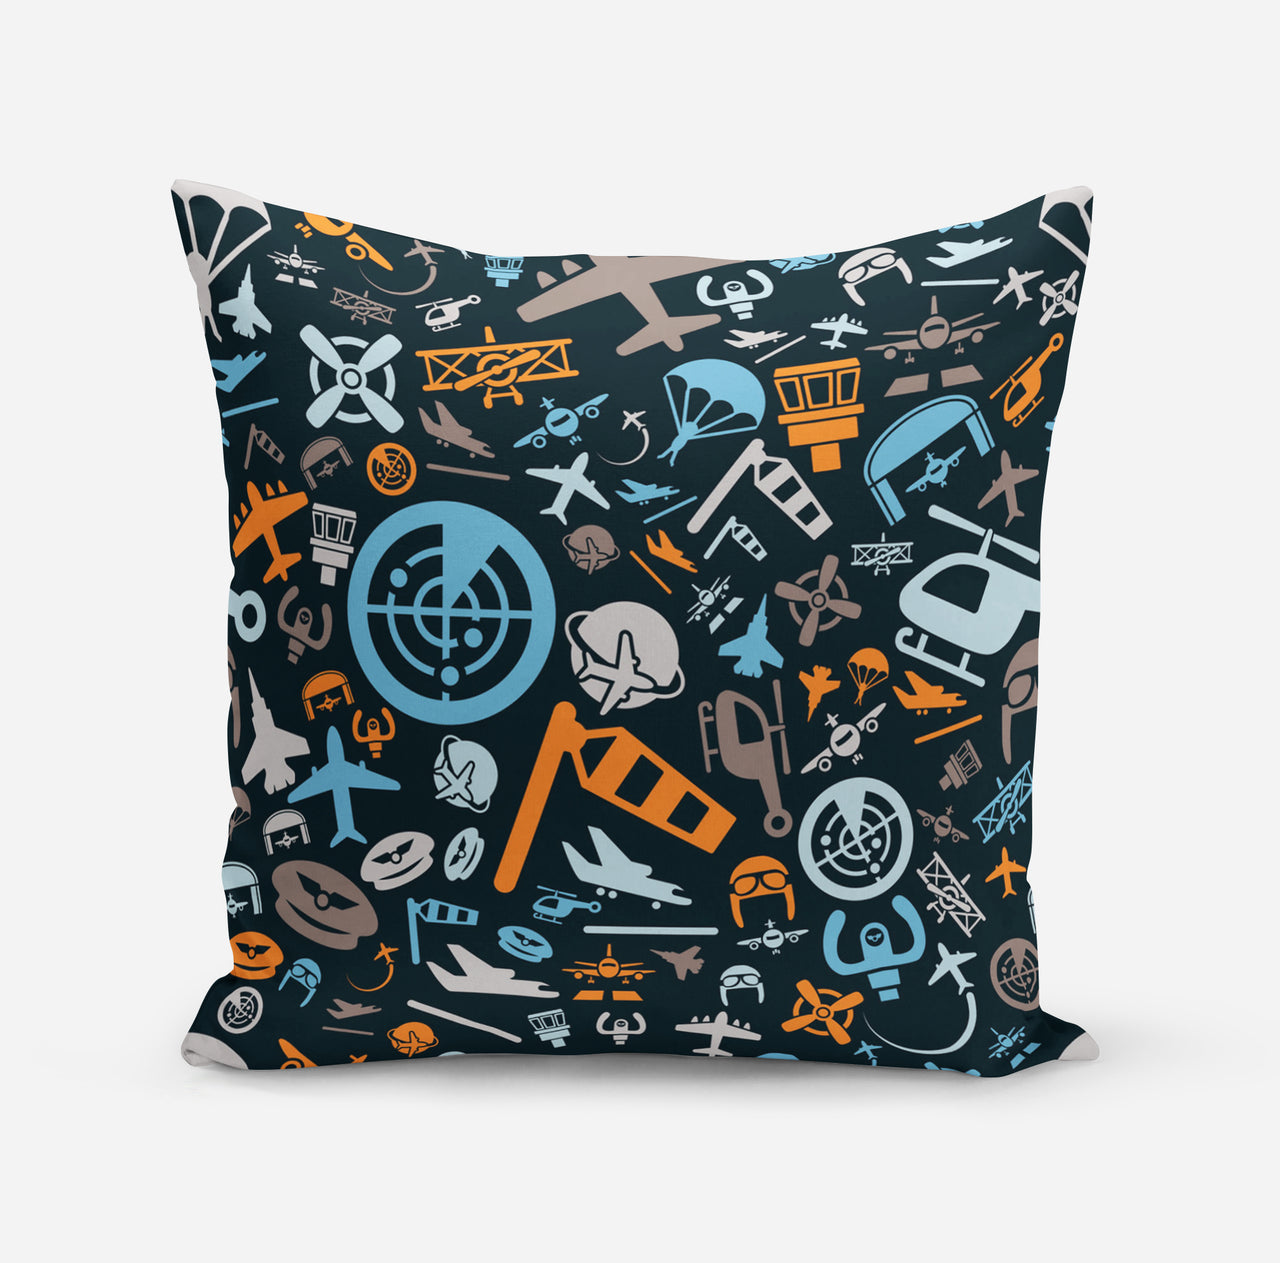 Aviation Icons Designed Pillows